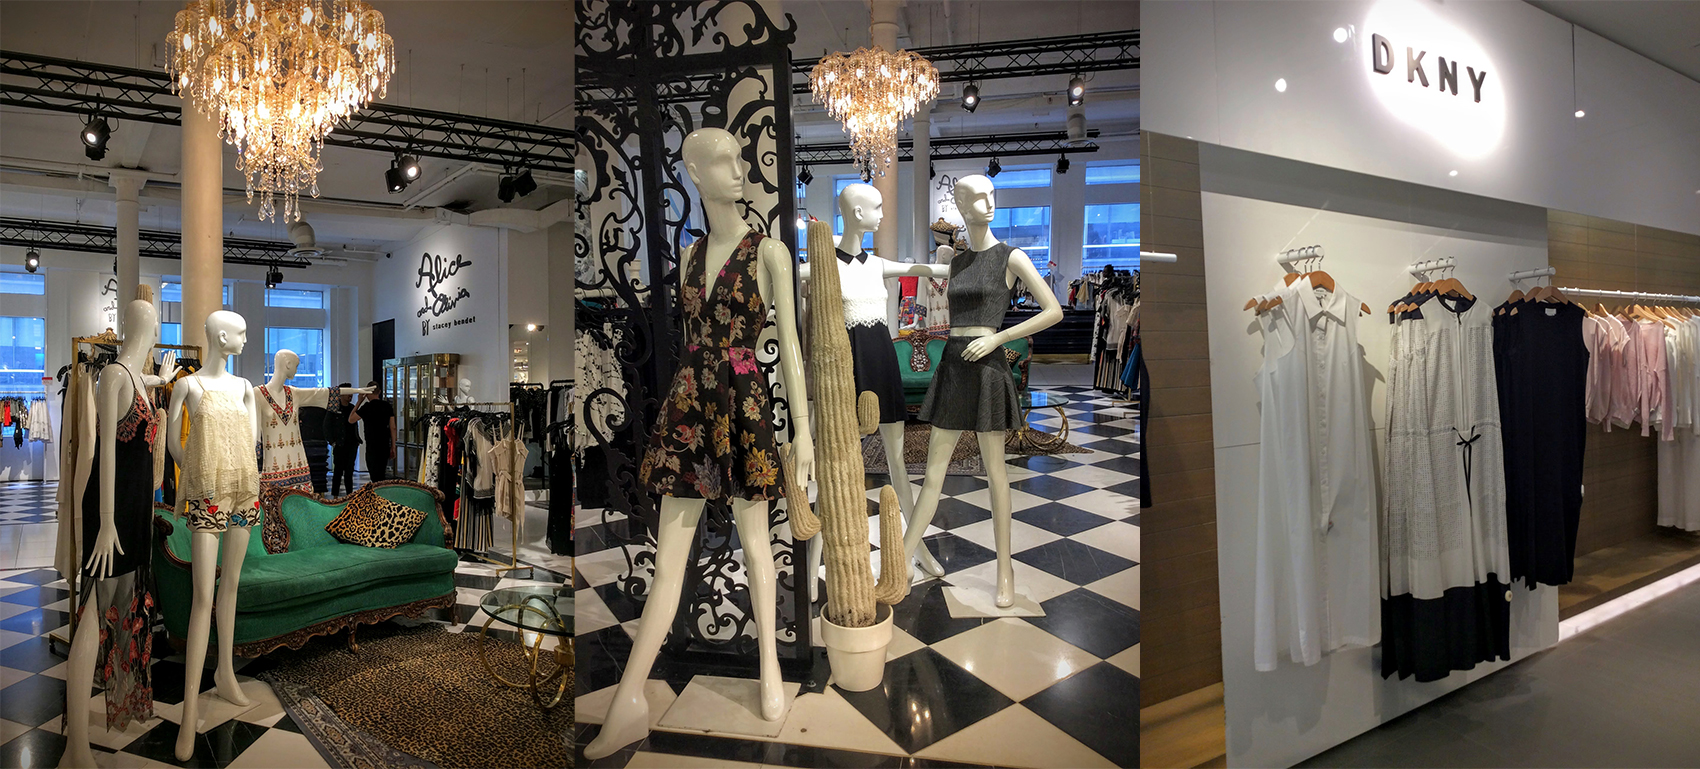 Alice & Olivia and DKNY | In-Store Trends at Bloomingdale's - Fashion ...